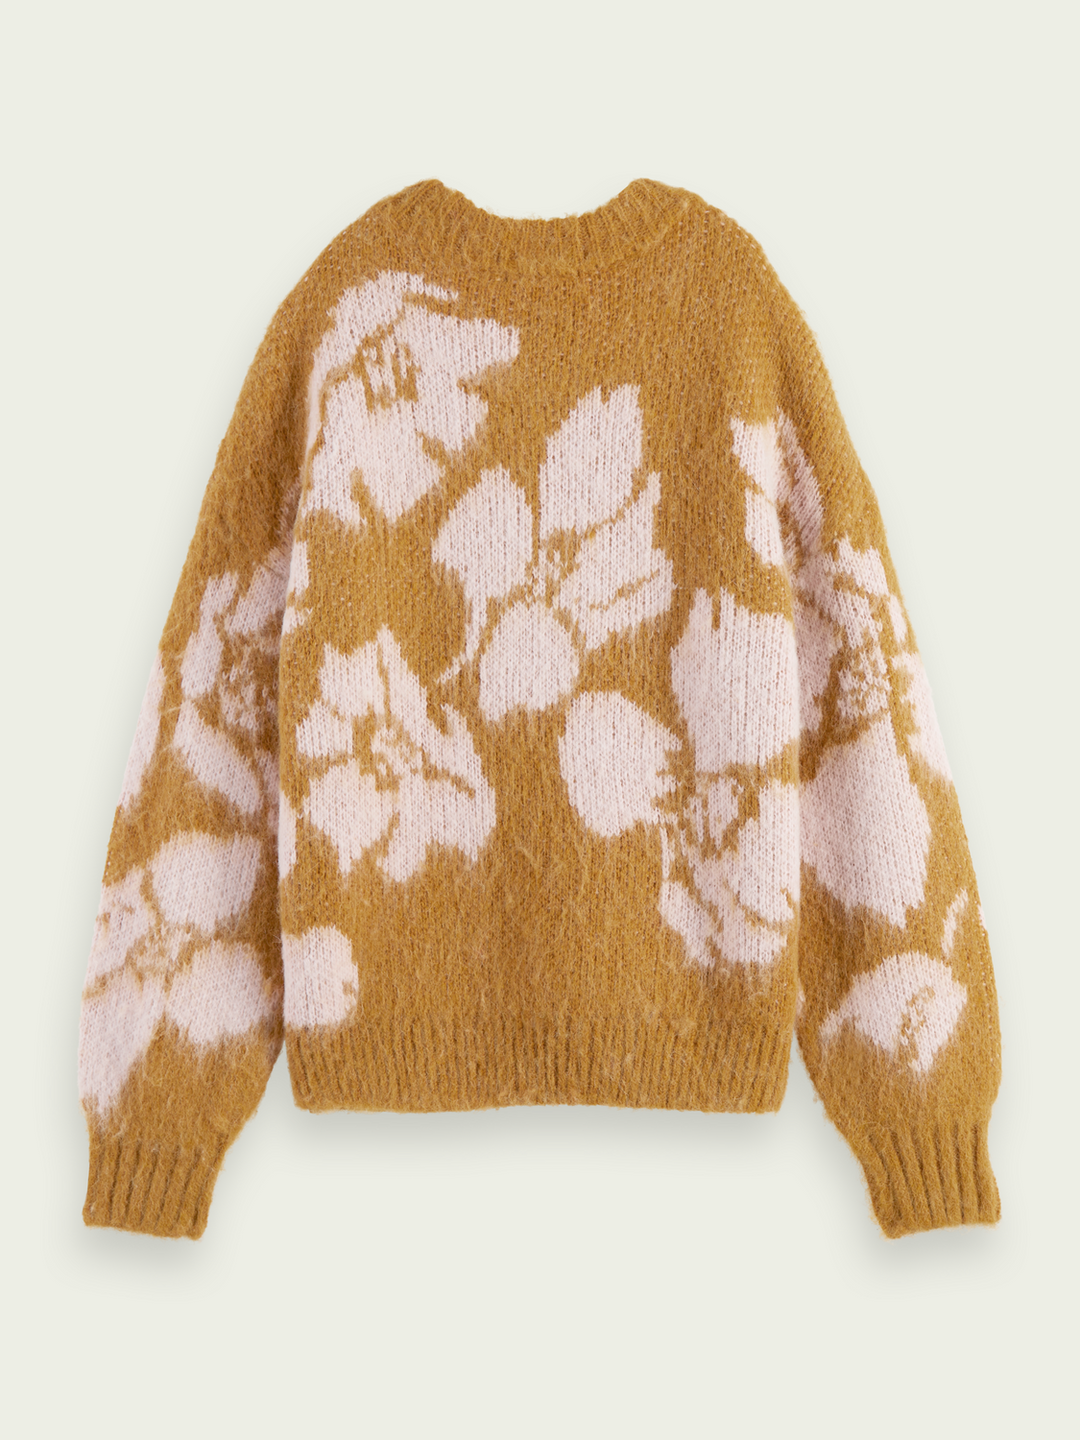 Brushed Abstract Floral Sweater